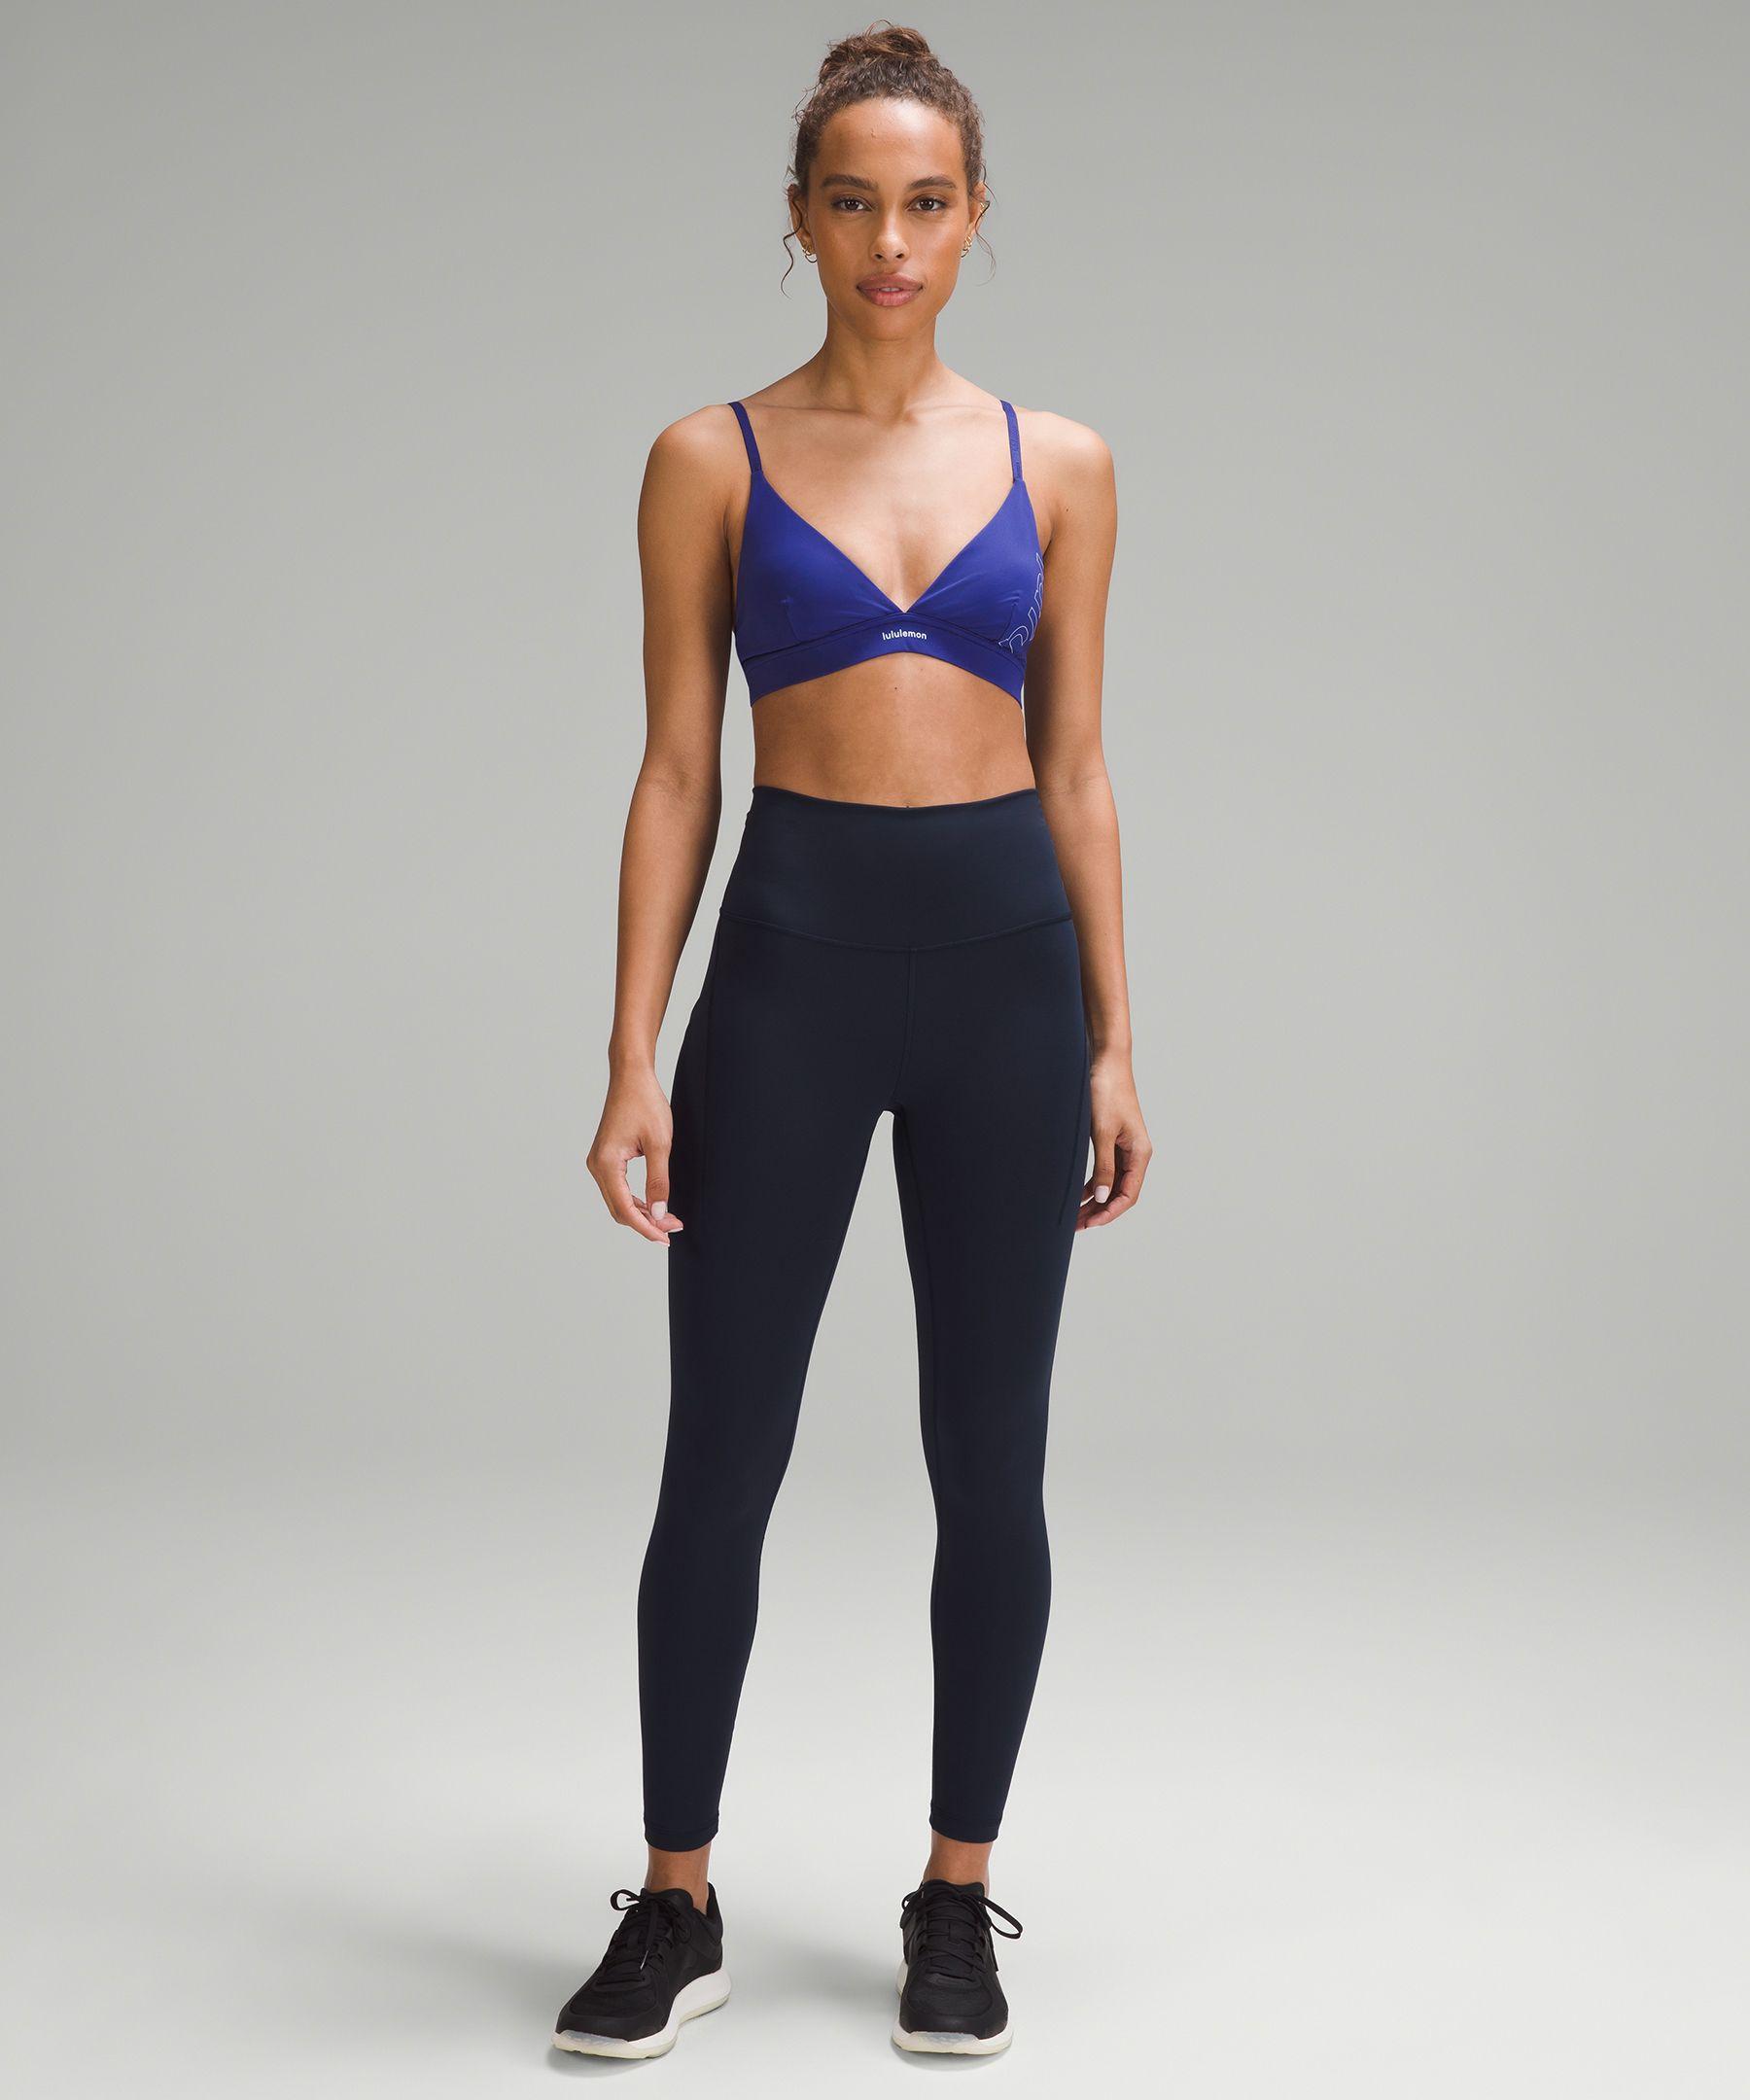 lululemon athletica License To Train Triangle Bra Light Support, A/b Cup  Graphic in Blue